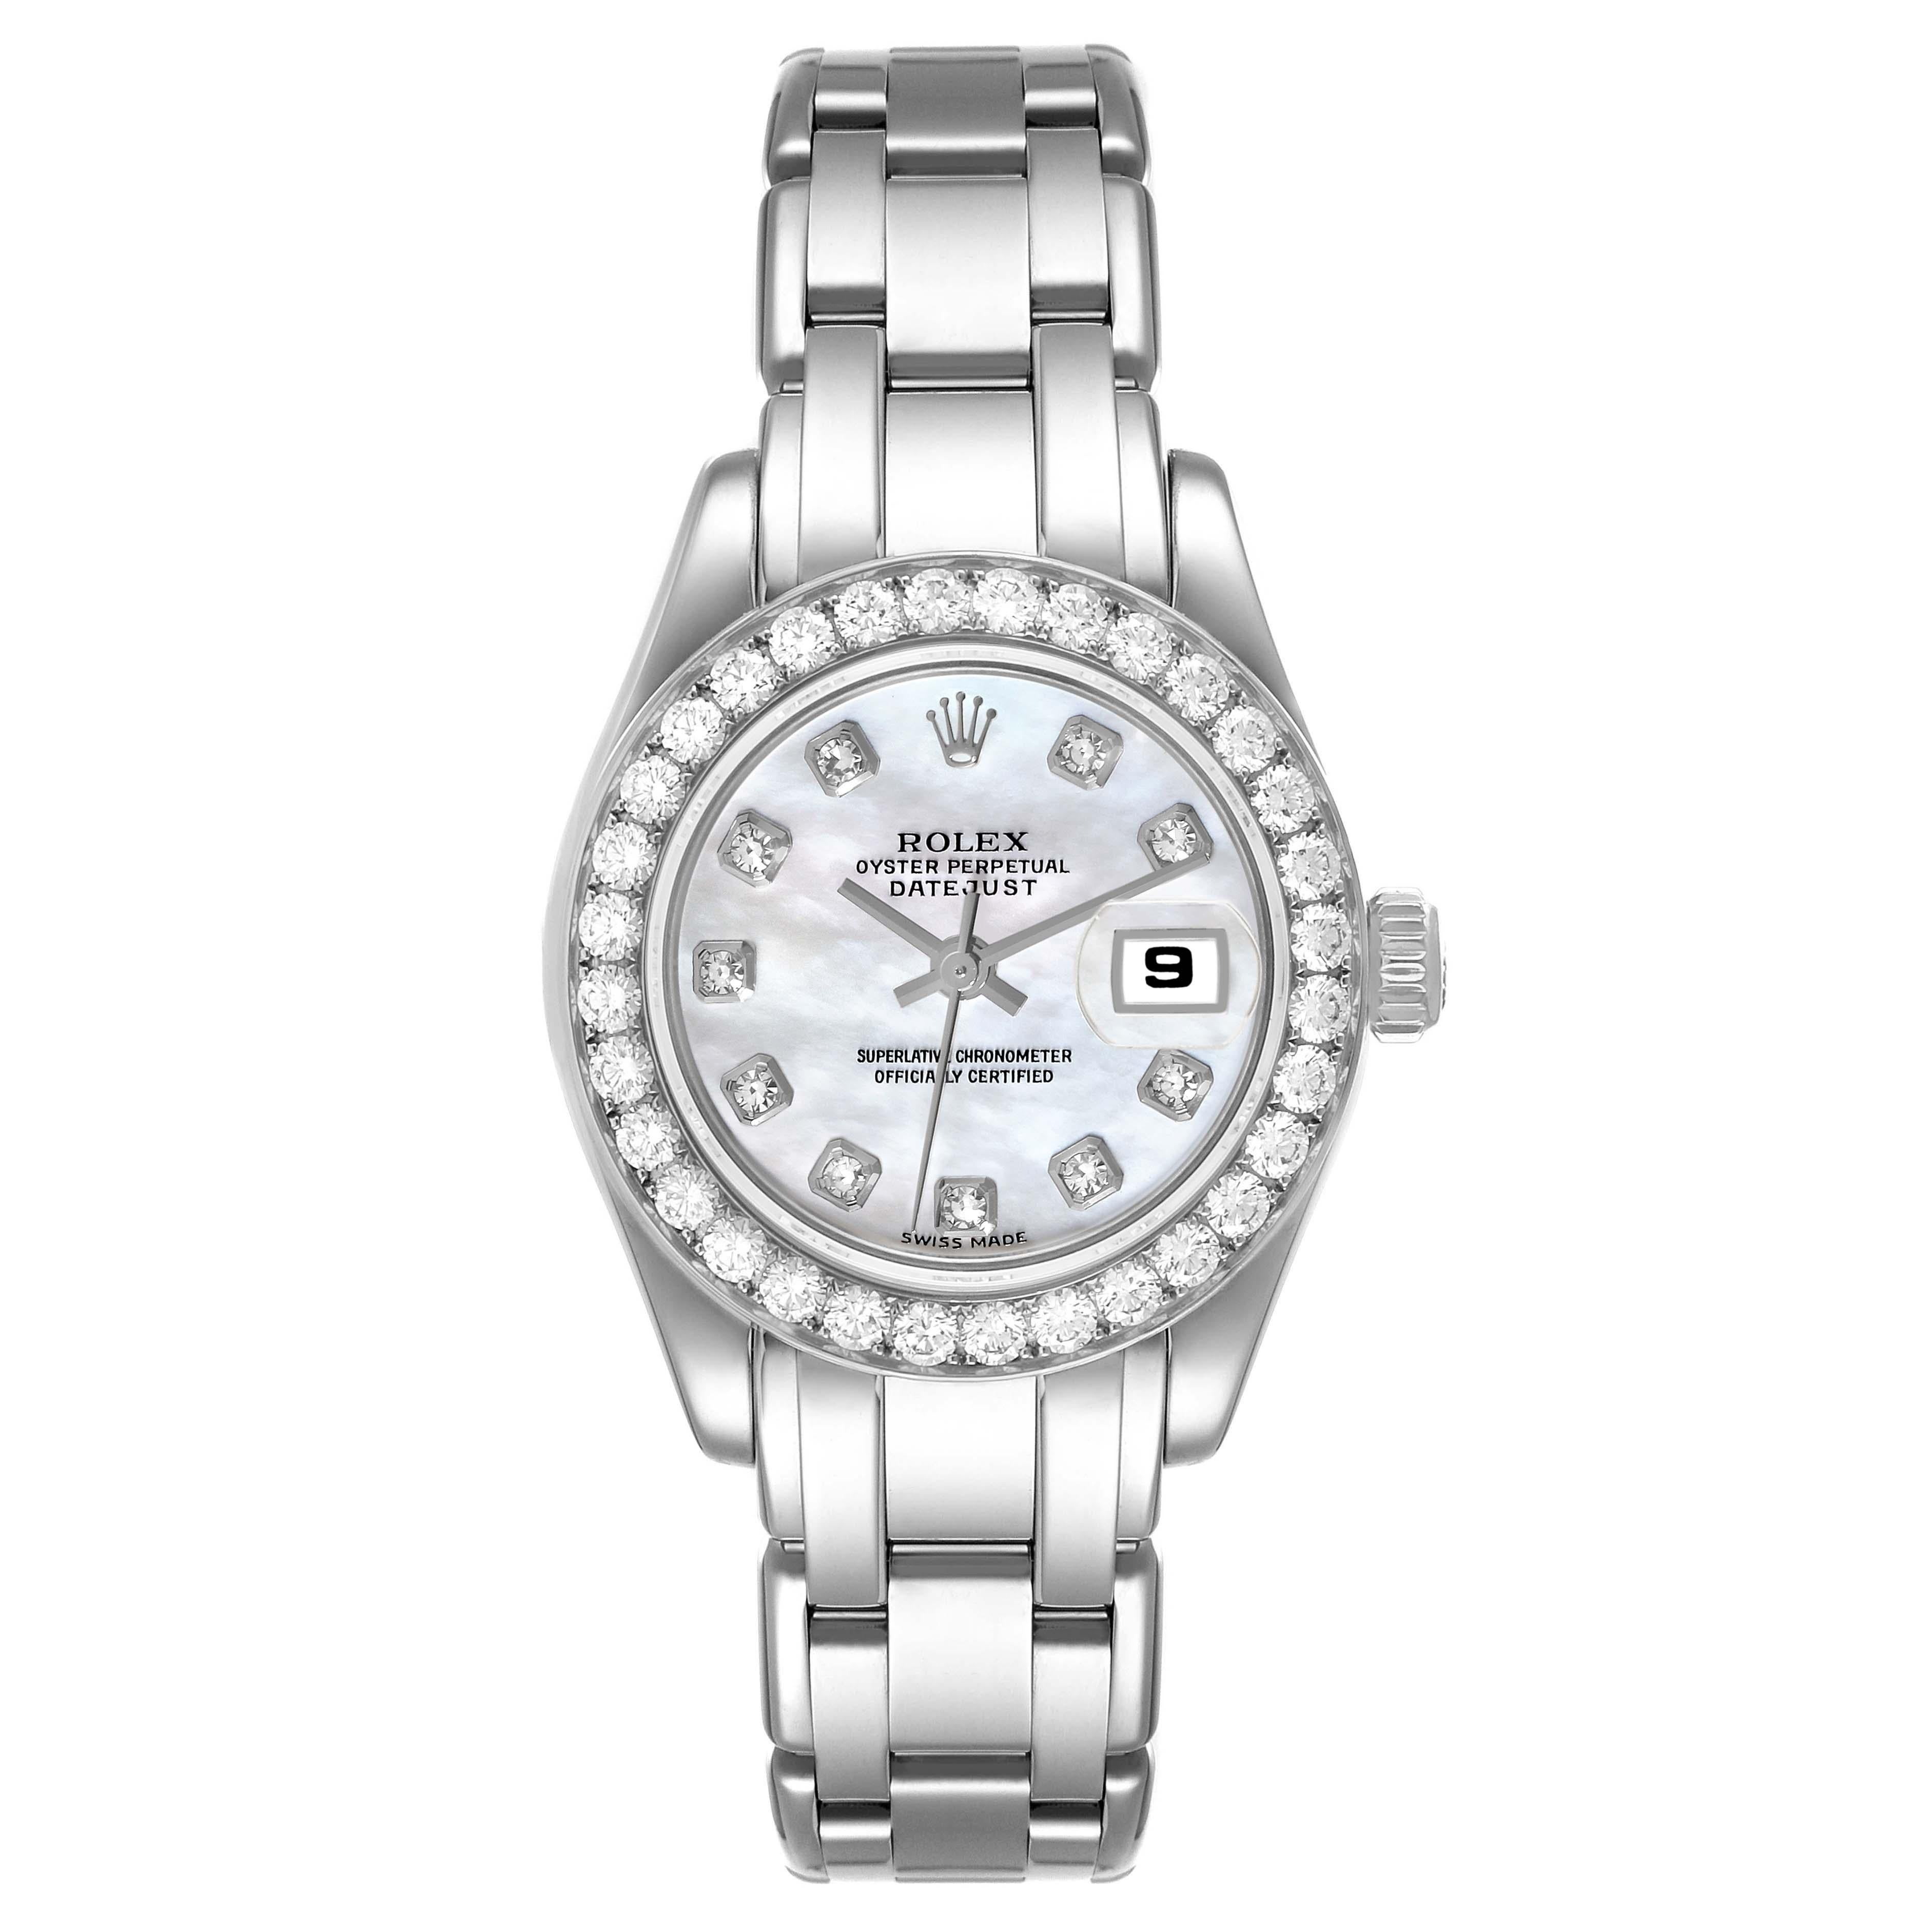 Rolex Pearlmaster White Gold Mother Of Pearl Diamond Ladies Watch 69299. Officially certified chronometer automatic self-winding movement with quickset date function. 18k white gold oyster case 29.0 mm in diameter. Rolex logo on a crown. Original